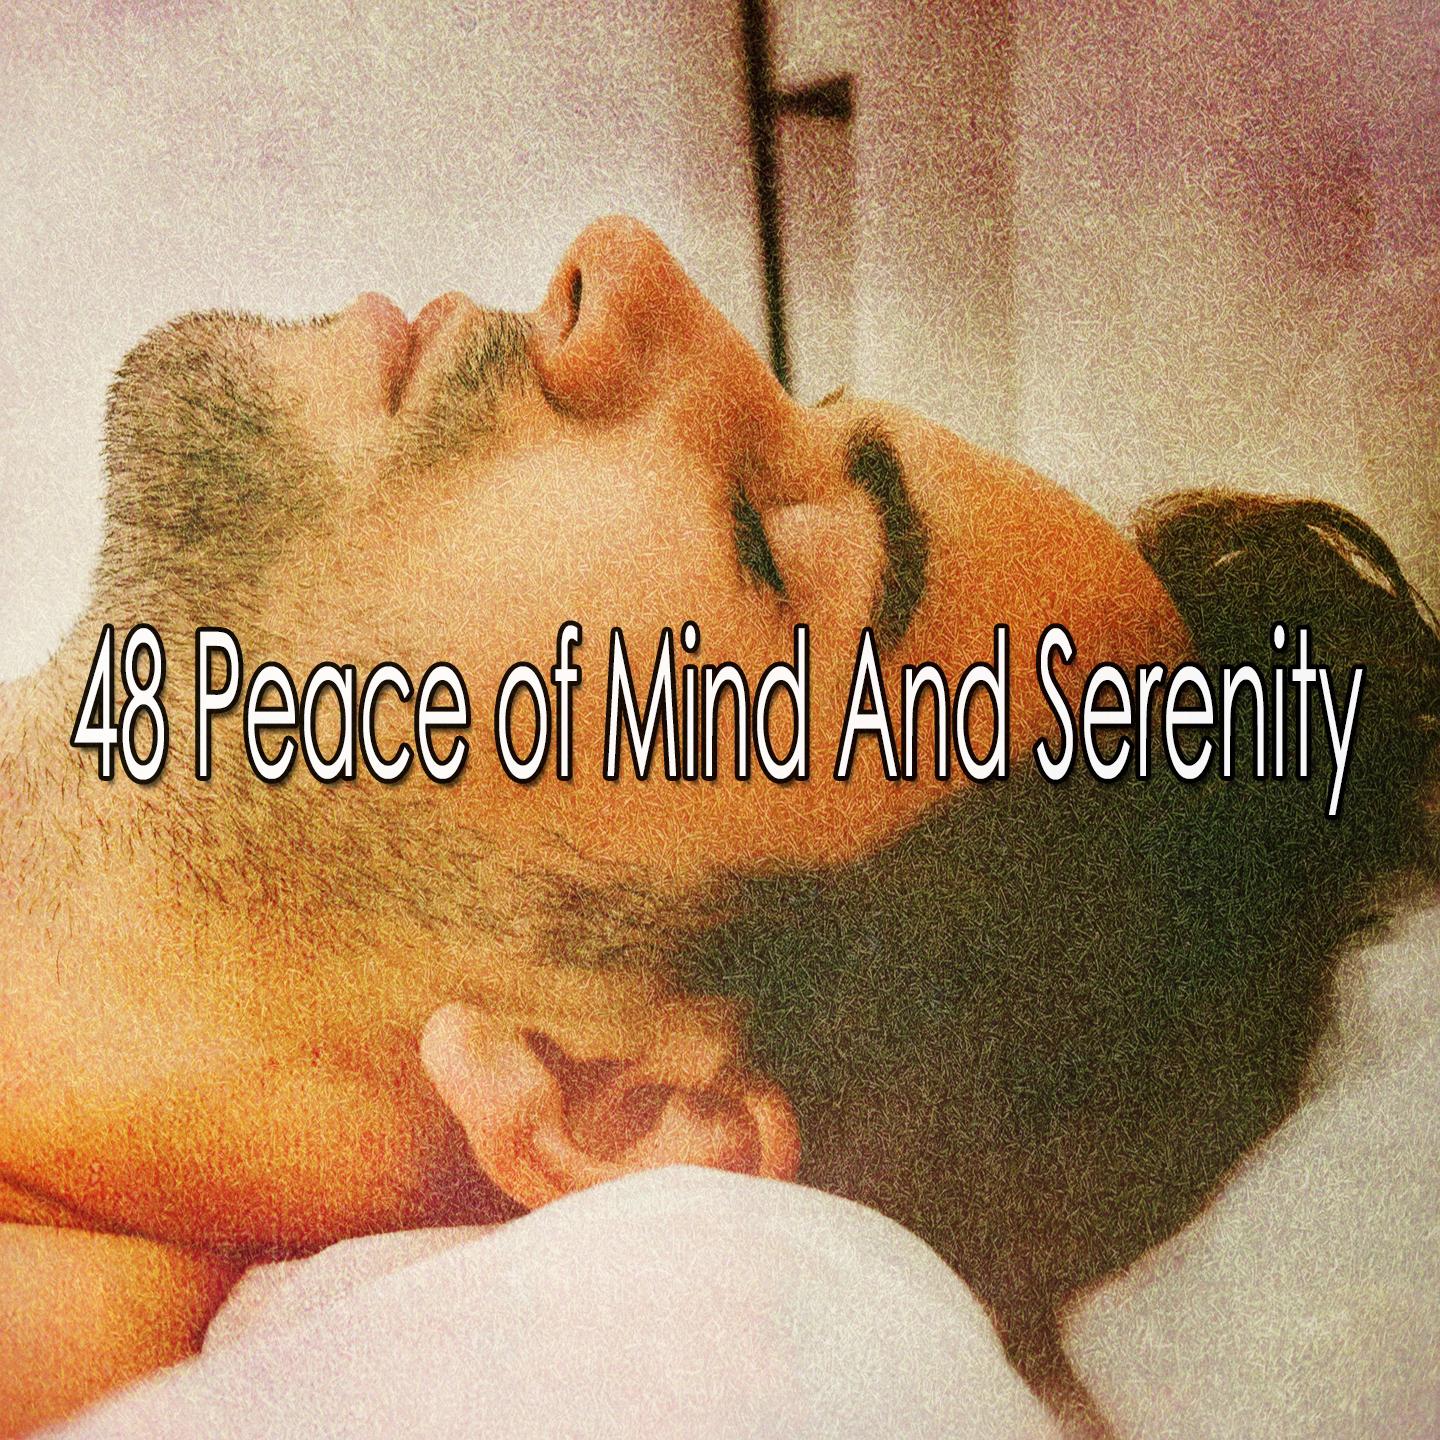 48 Peace of Mind and Serenity